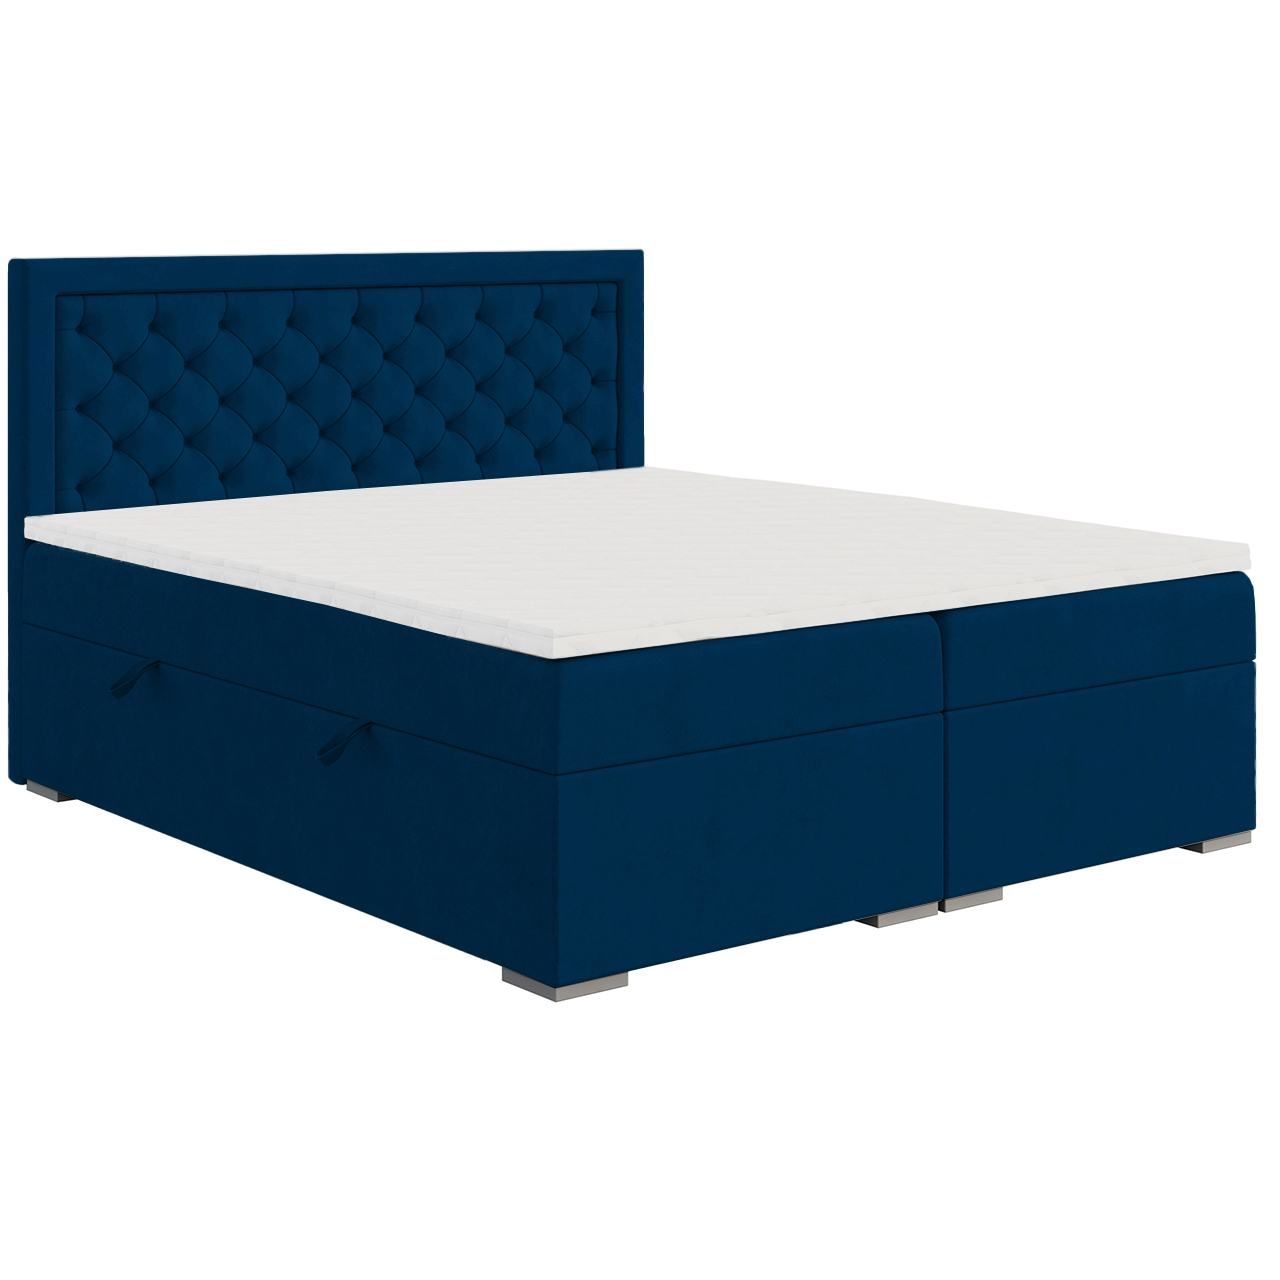 Upholstered bed BLUM 160x200 riviera 81